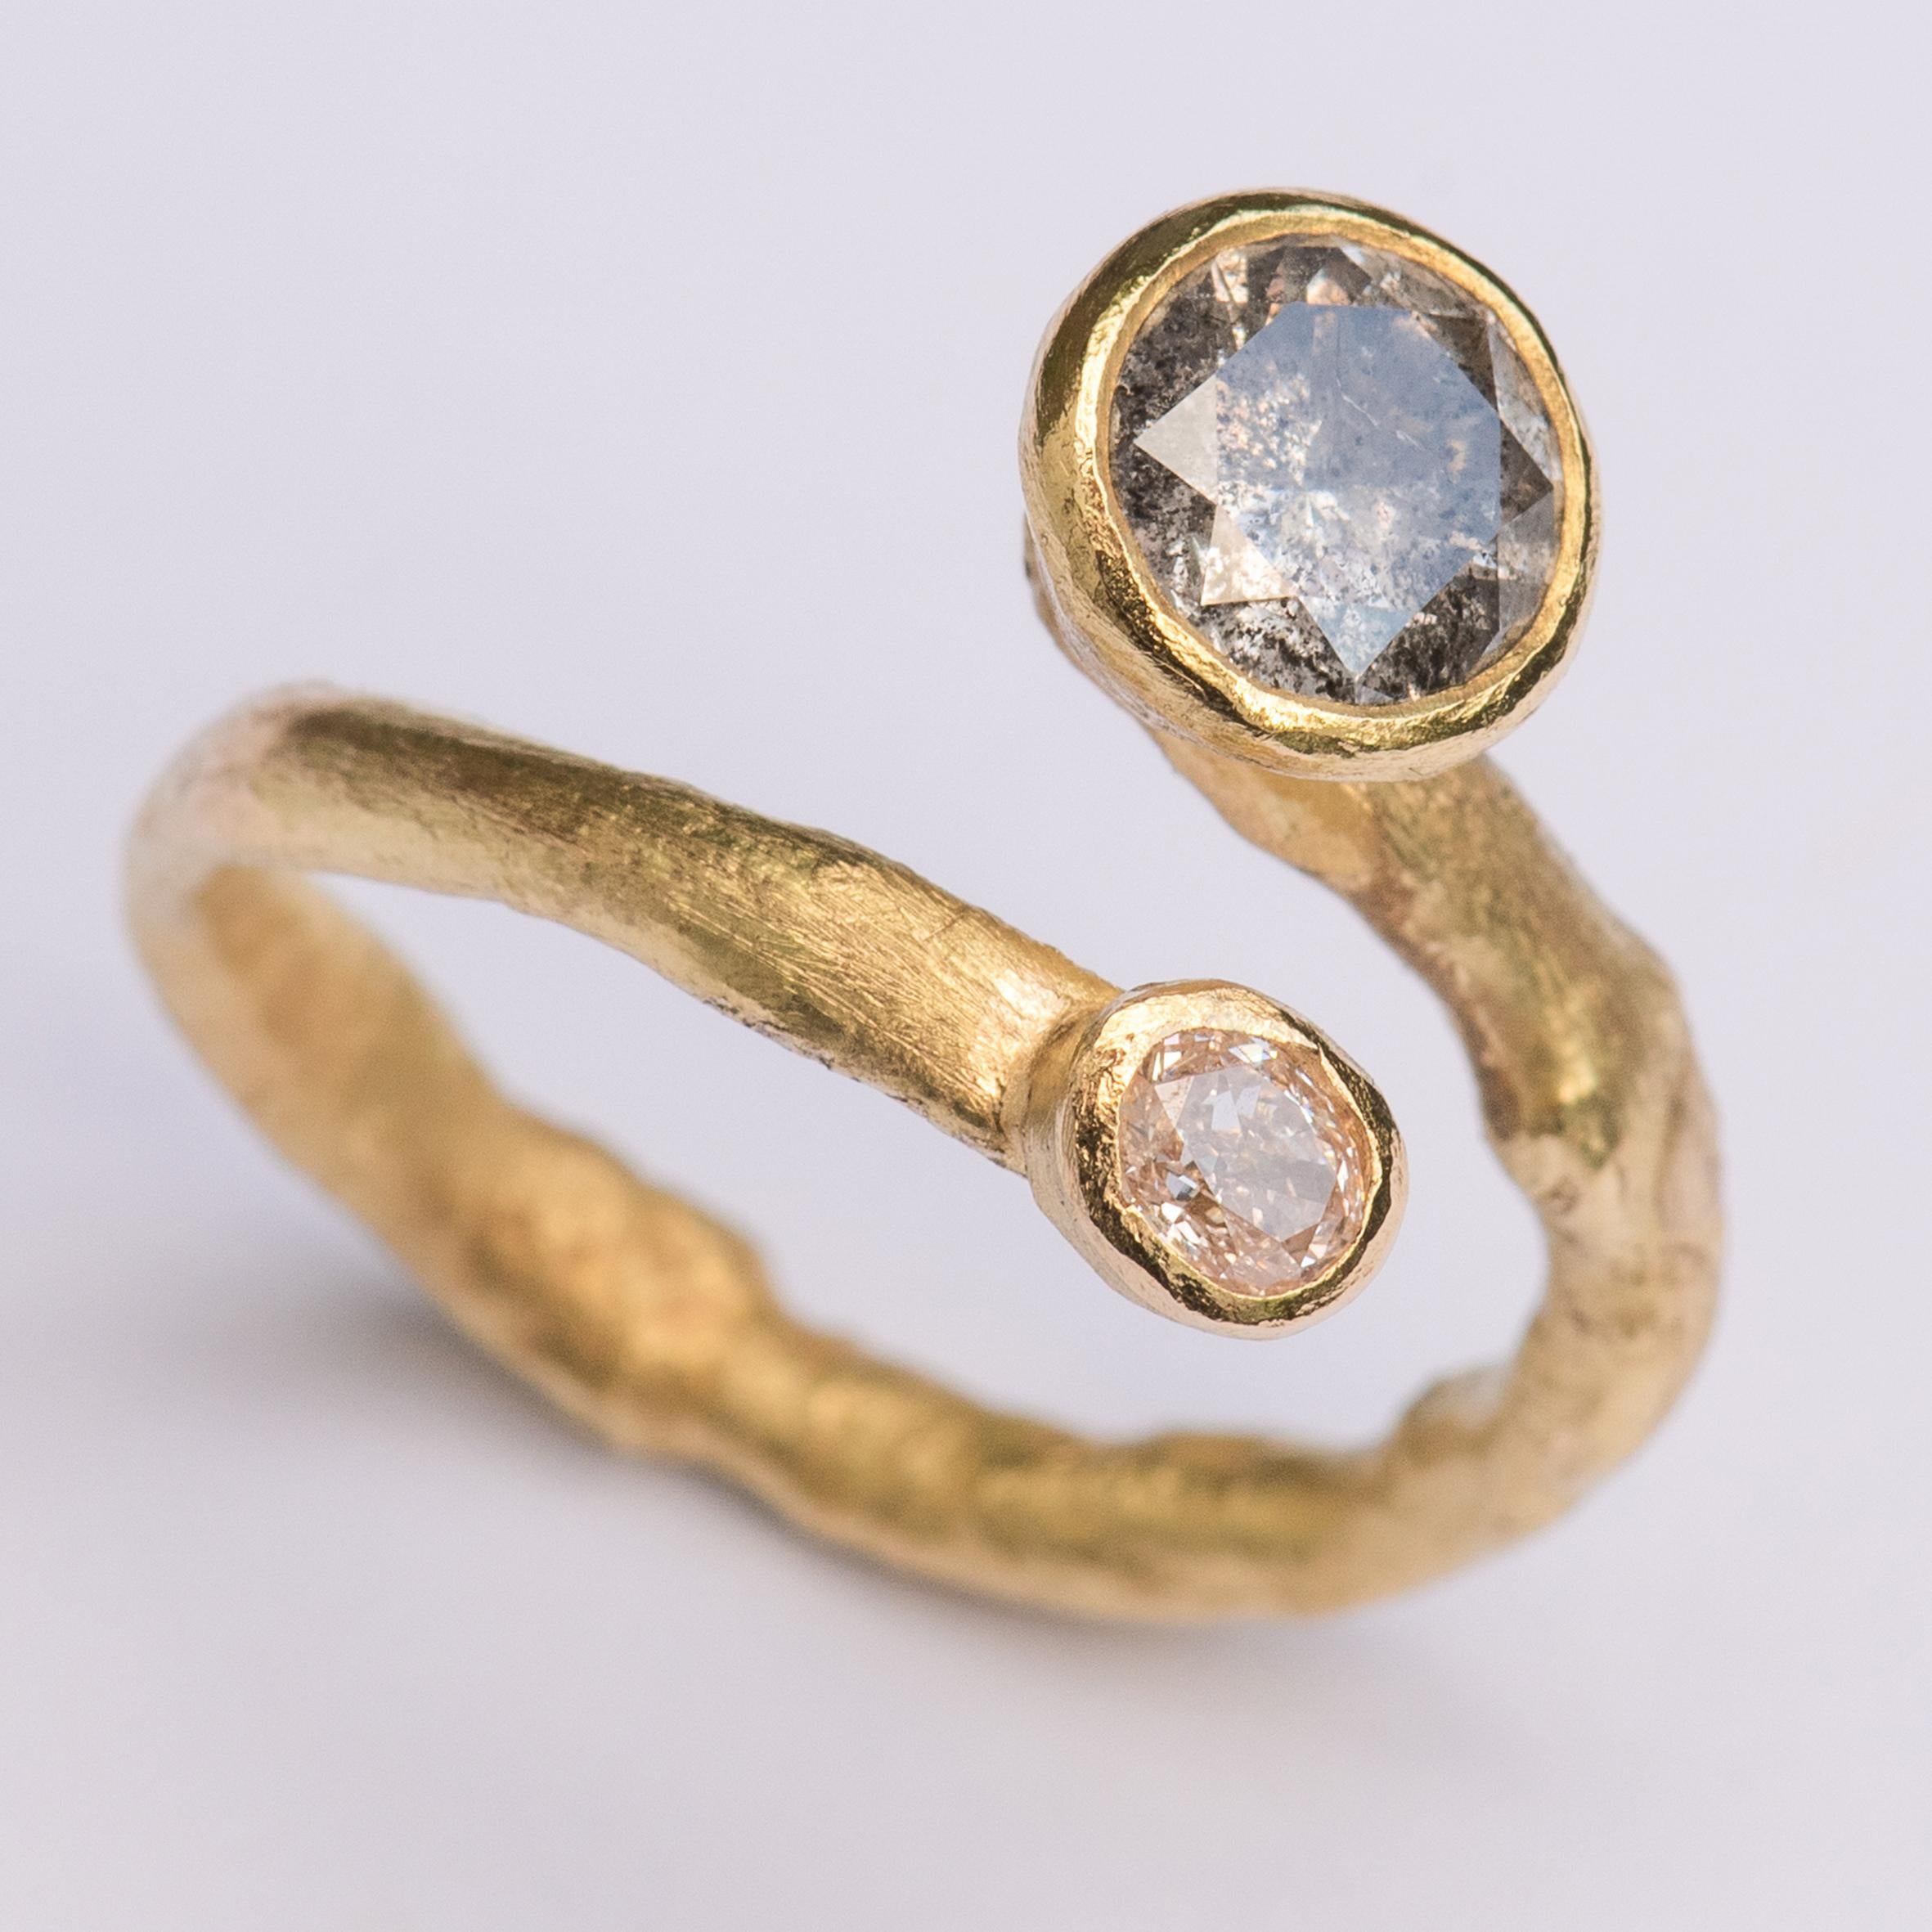 1.44 ct salt and pepper grey diamond and 0.20 ct pink diamond in 18k gold tapered settings on 18k organic texture open band.
Handmade by London Goldsmith Disa Allsopp who is inspired by ancient jewellery to create contemporary collectable pieces.